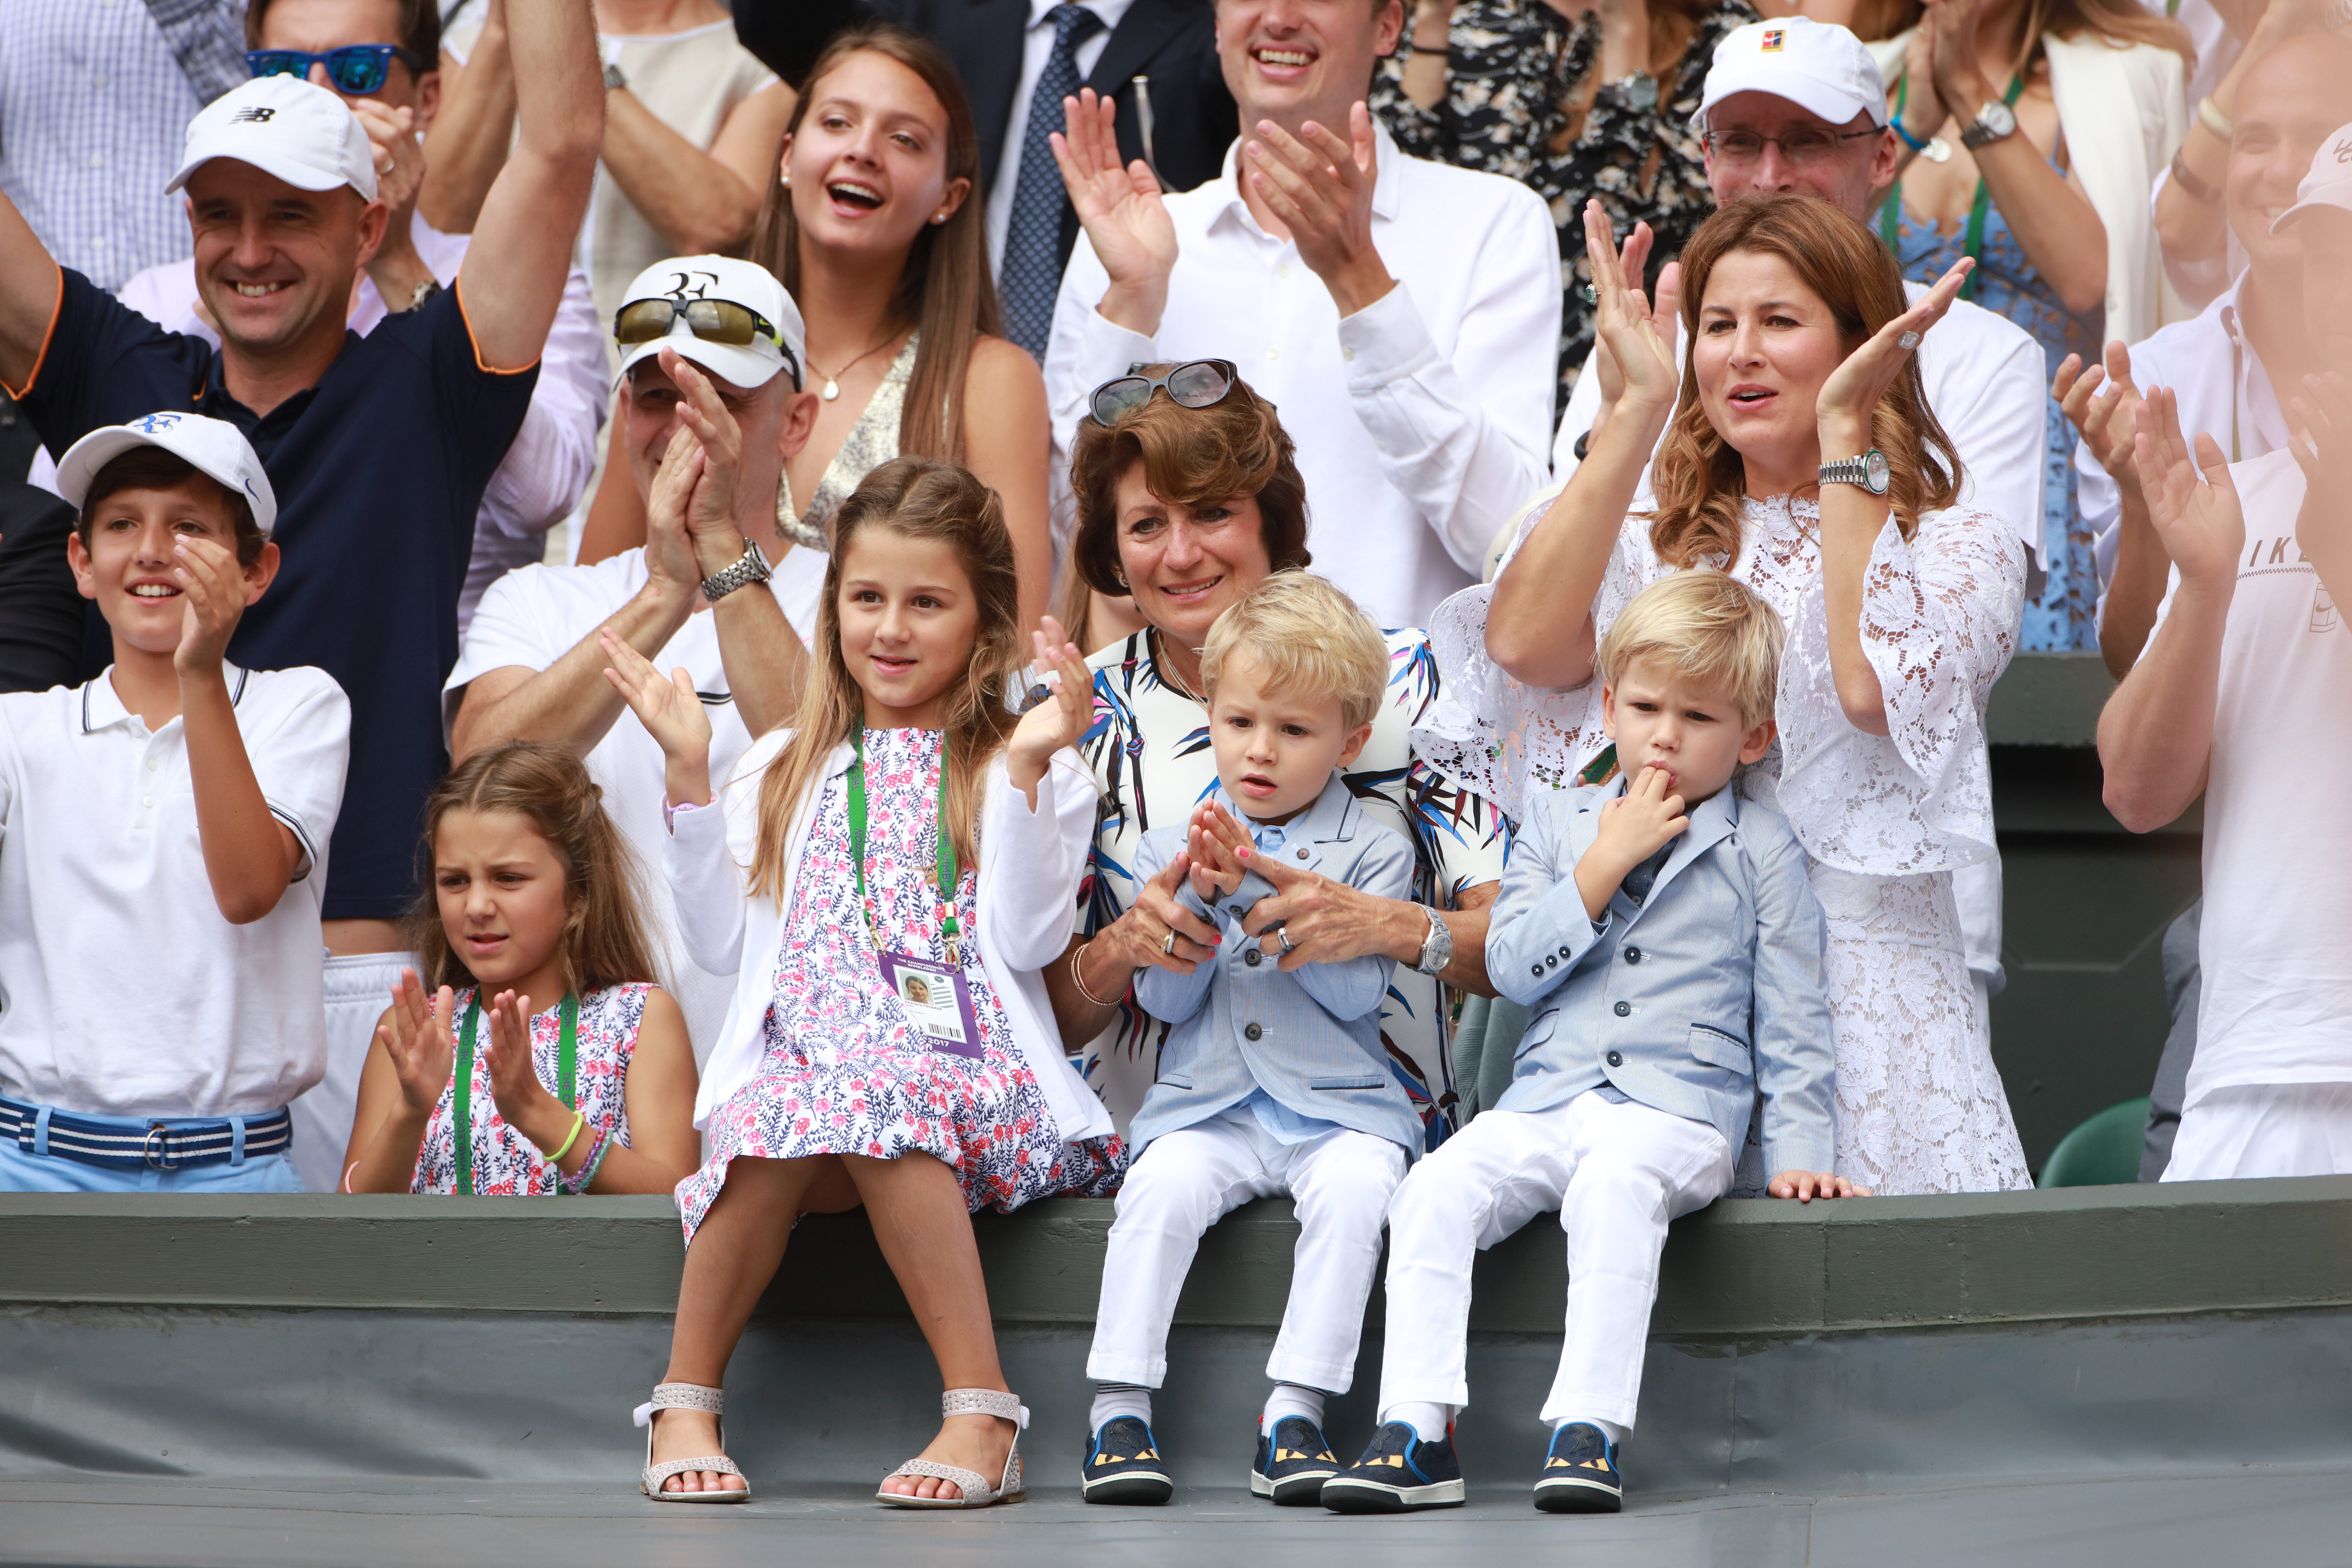 Roger Federer's wife Mirka Federer and their four children, twin daughters Myla and Charlene, twin sons Leo and Lenny, during the Wimbledon Lawn Tennis Championships on July 16, 2017 in London, England. | Source: Getty Images